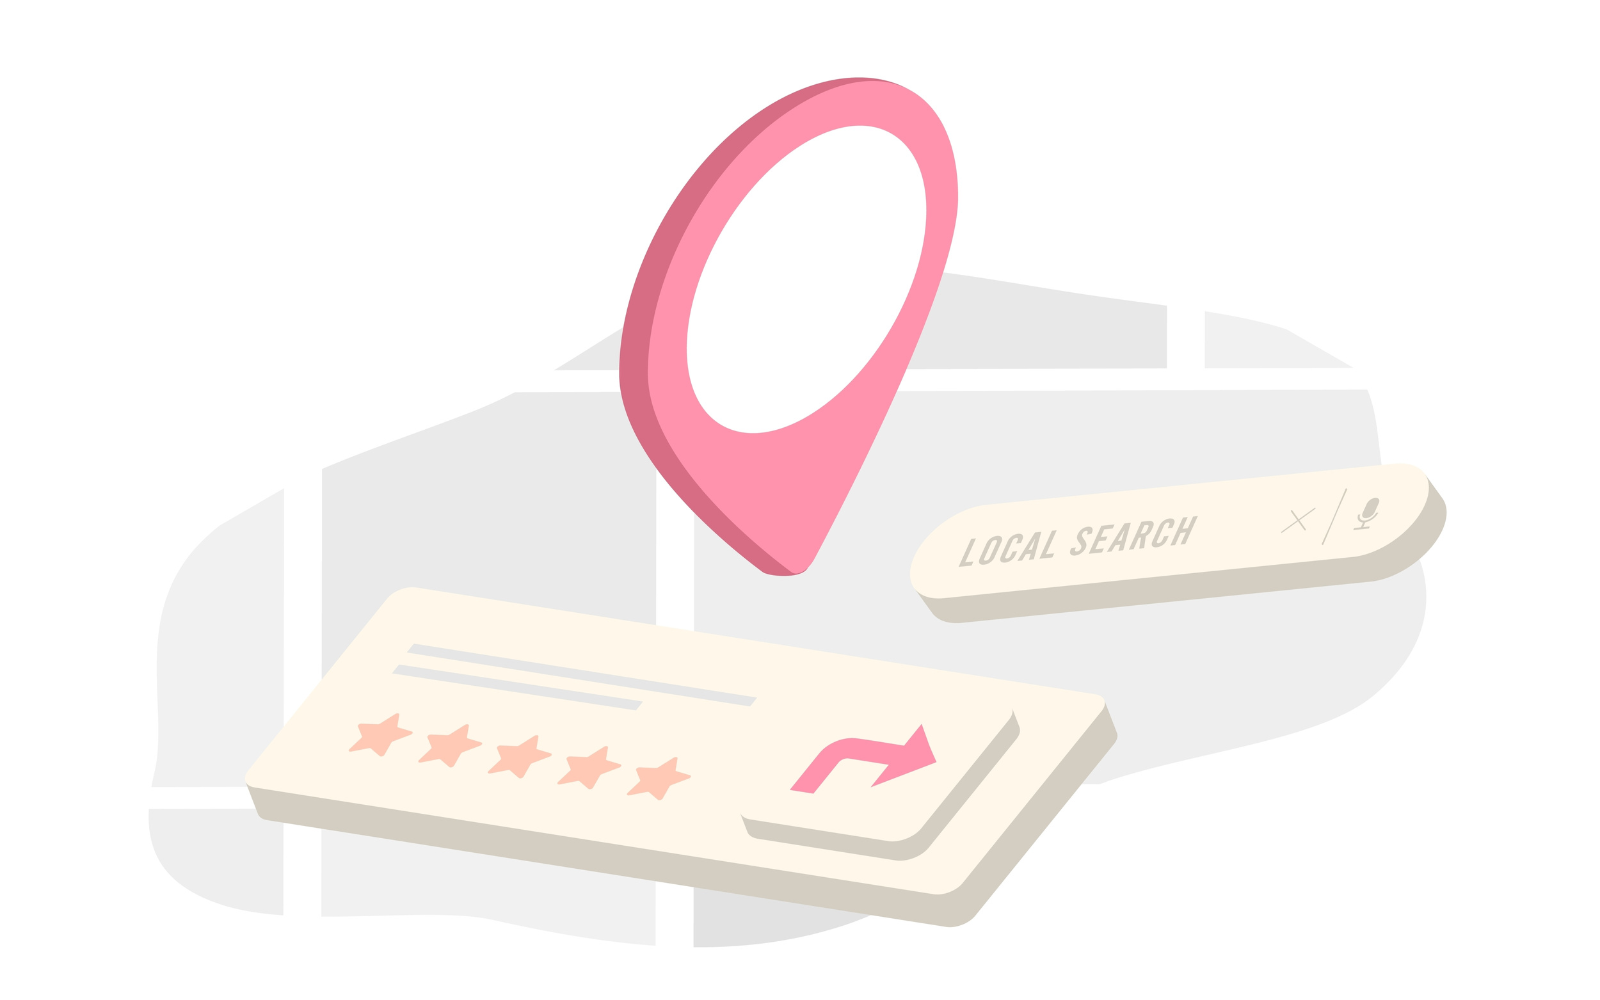 A Complete Guide for Local SEO